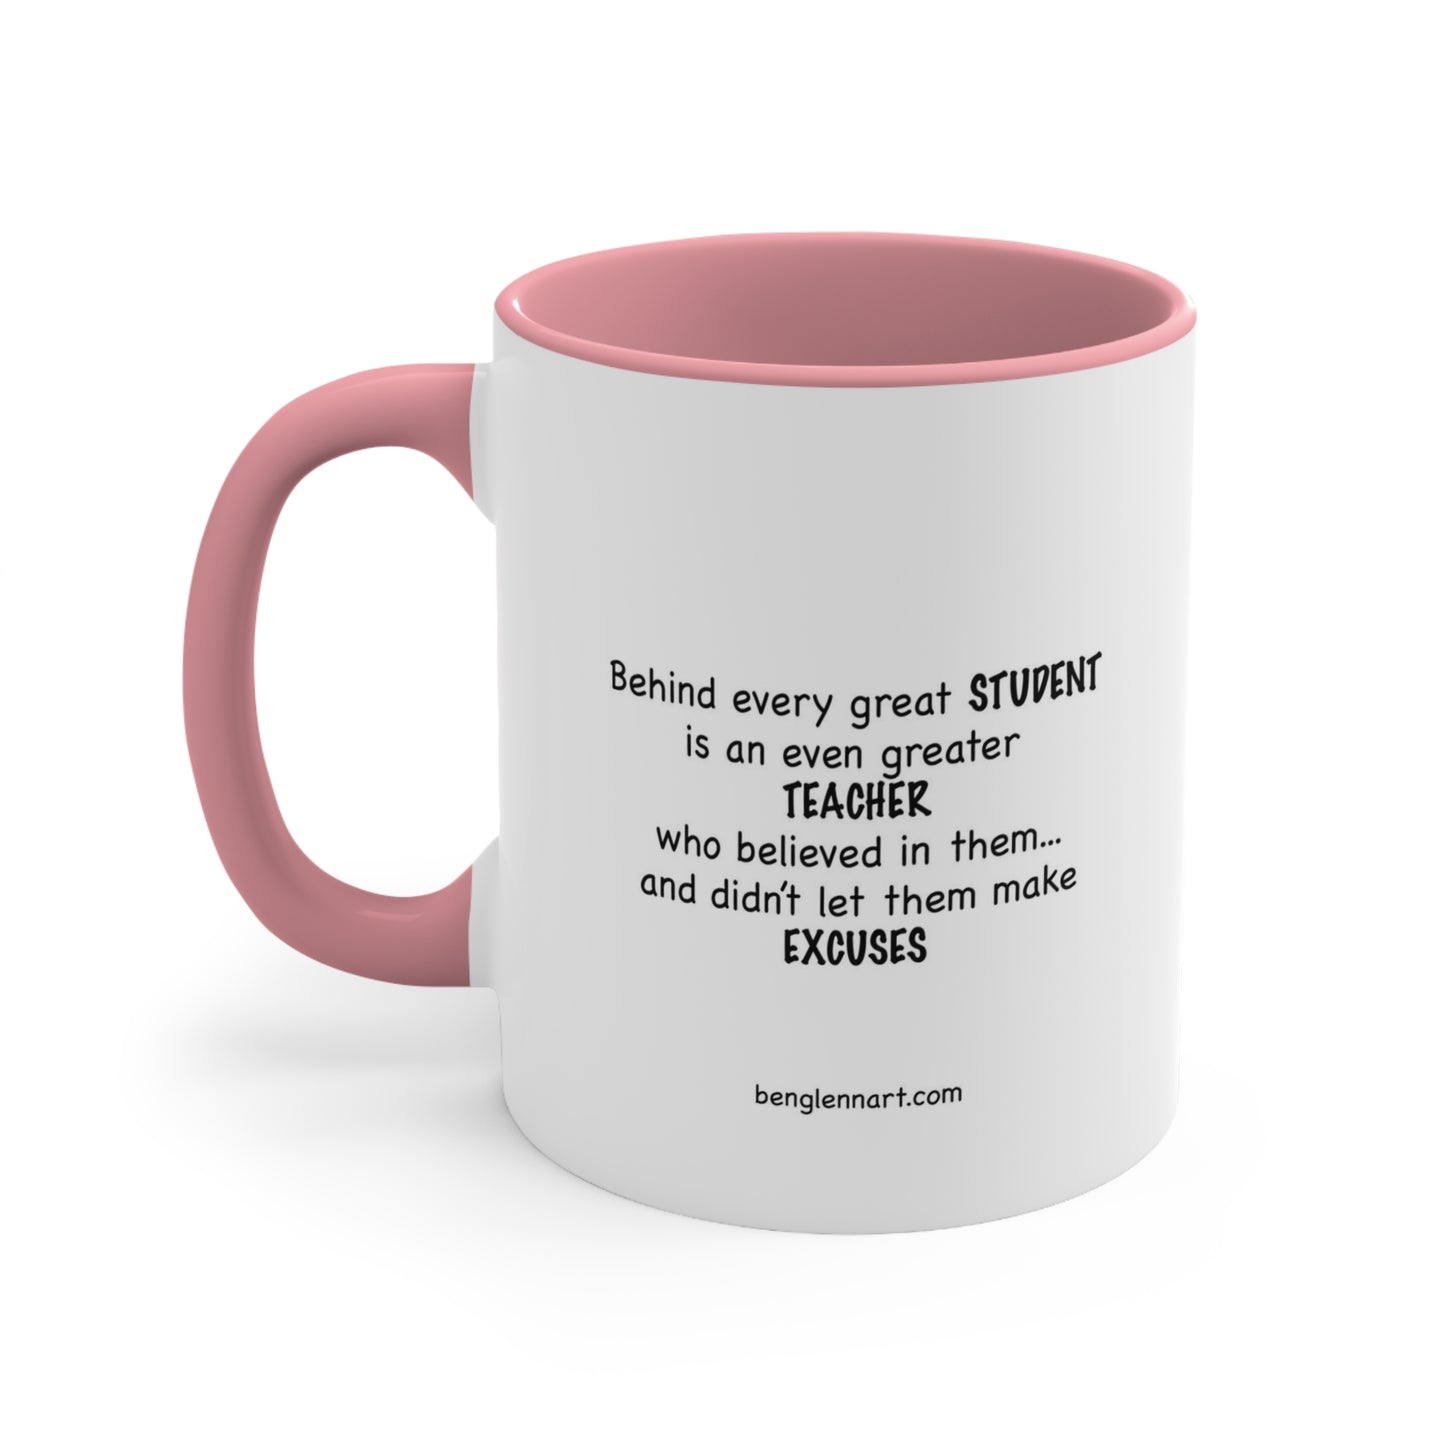 ADHD Inspired Coffee Mug - 'I'm Special, What's Your Excuse?'